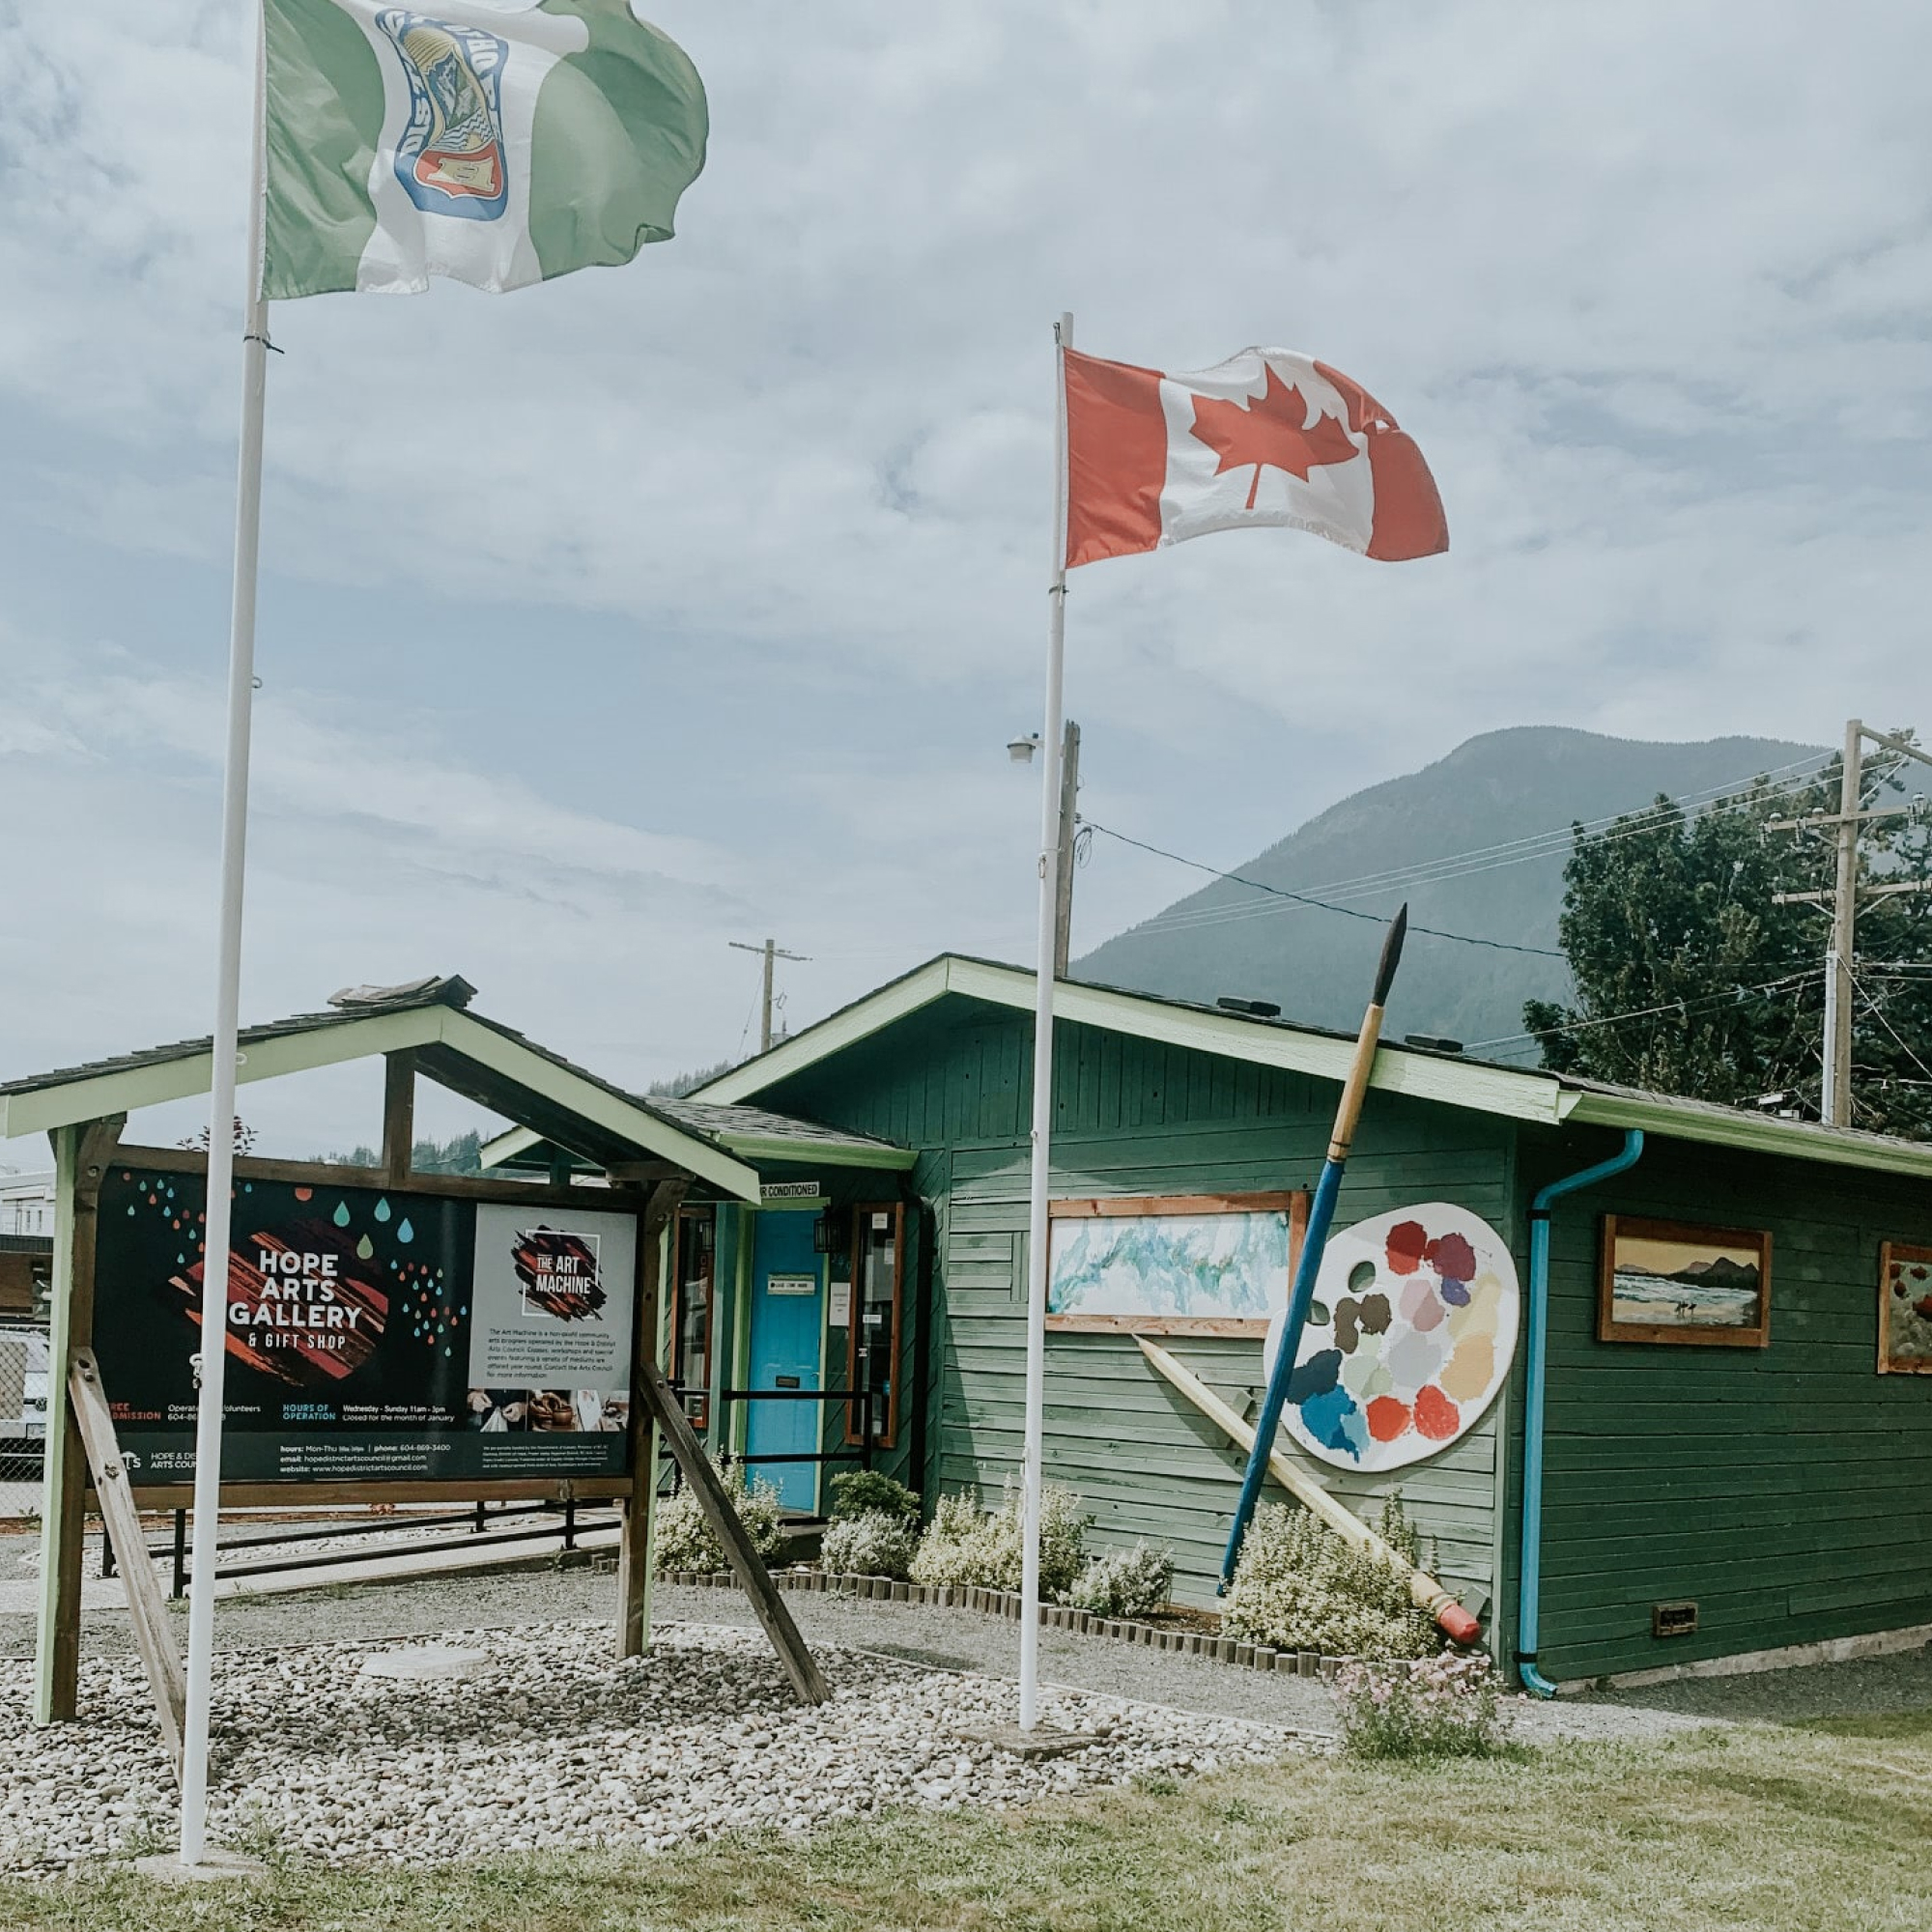 A small building adorned with Canadian flags and a flag pole, representing Canadian pride and patriotism.